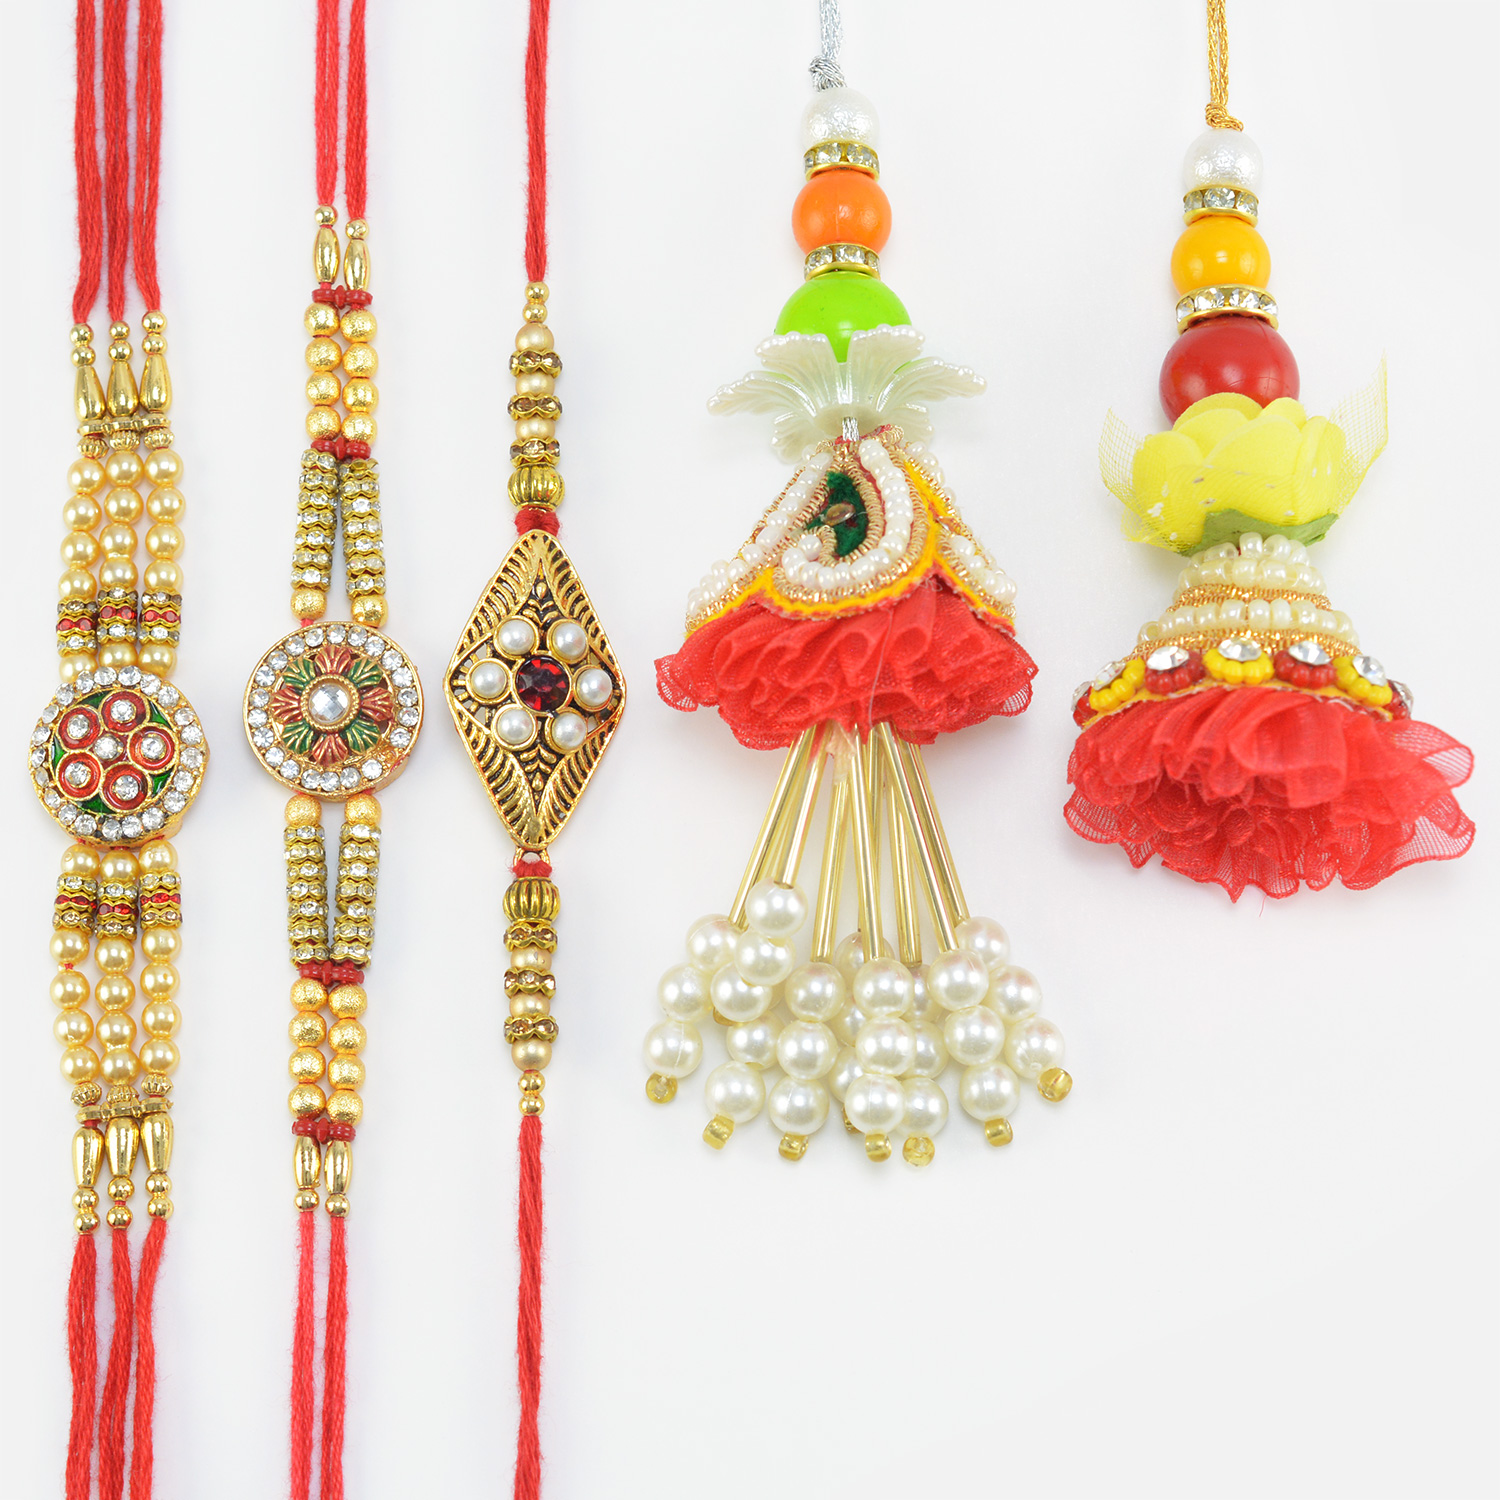 Three Pear and Beads Pettern Brother Rakhis with 2 Red Shaded Attractive Lumba Rakhis